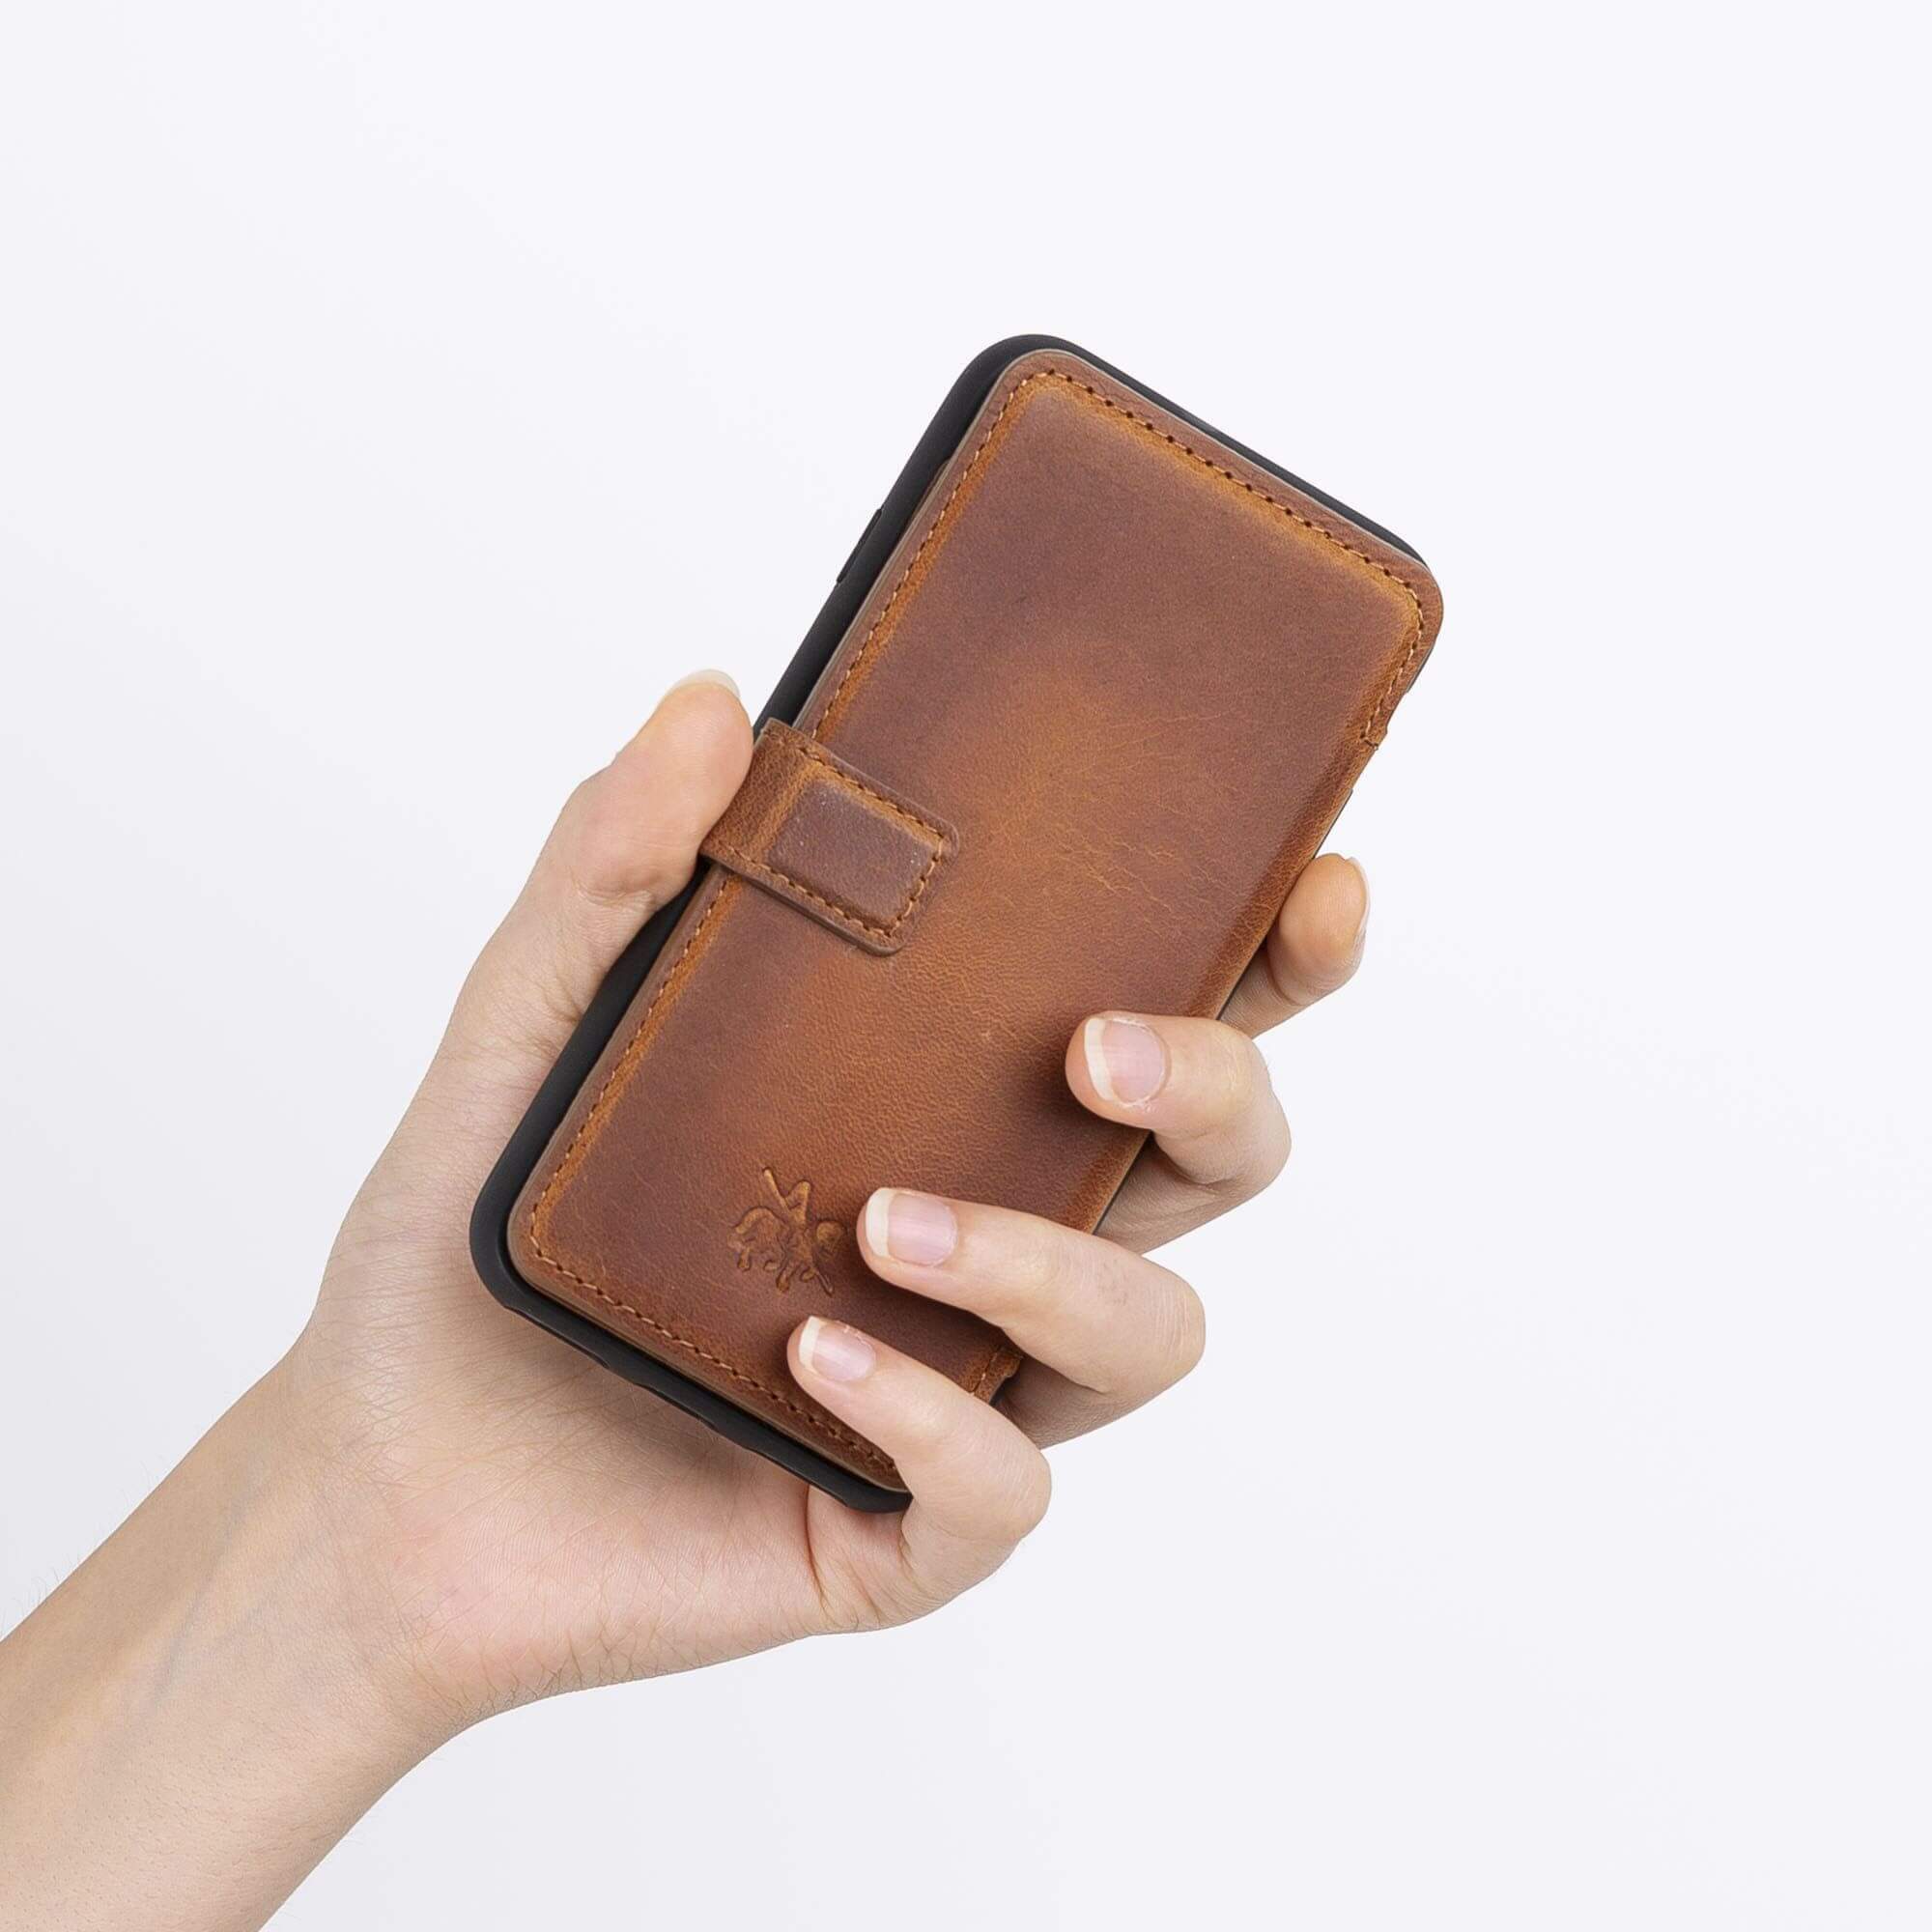 leather wallet case